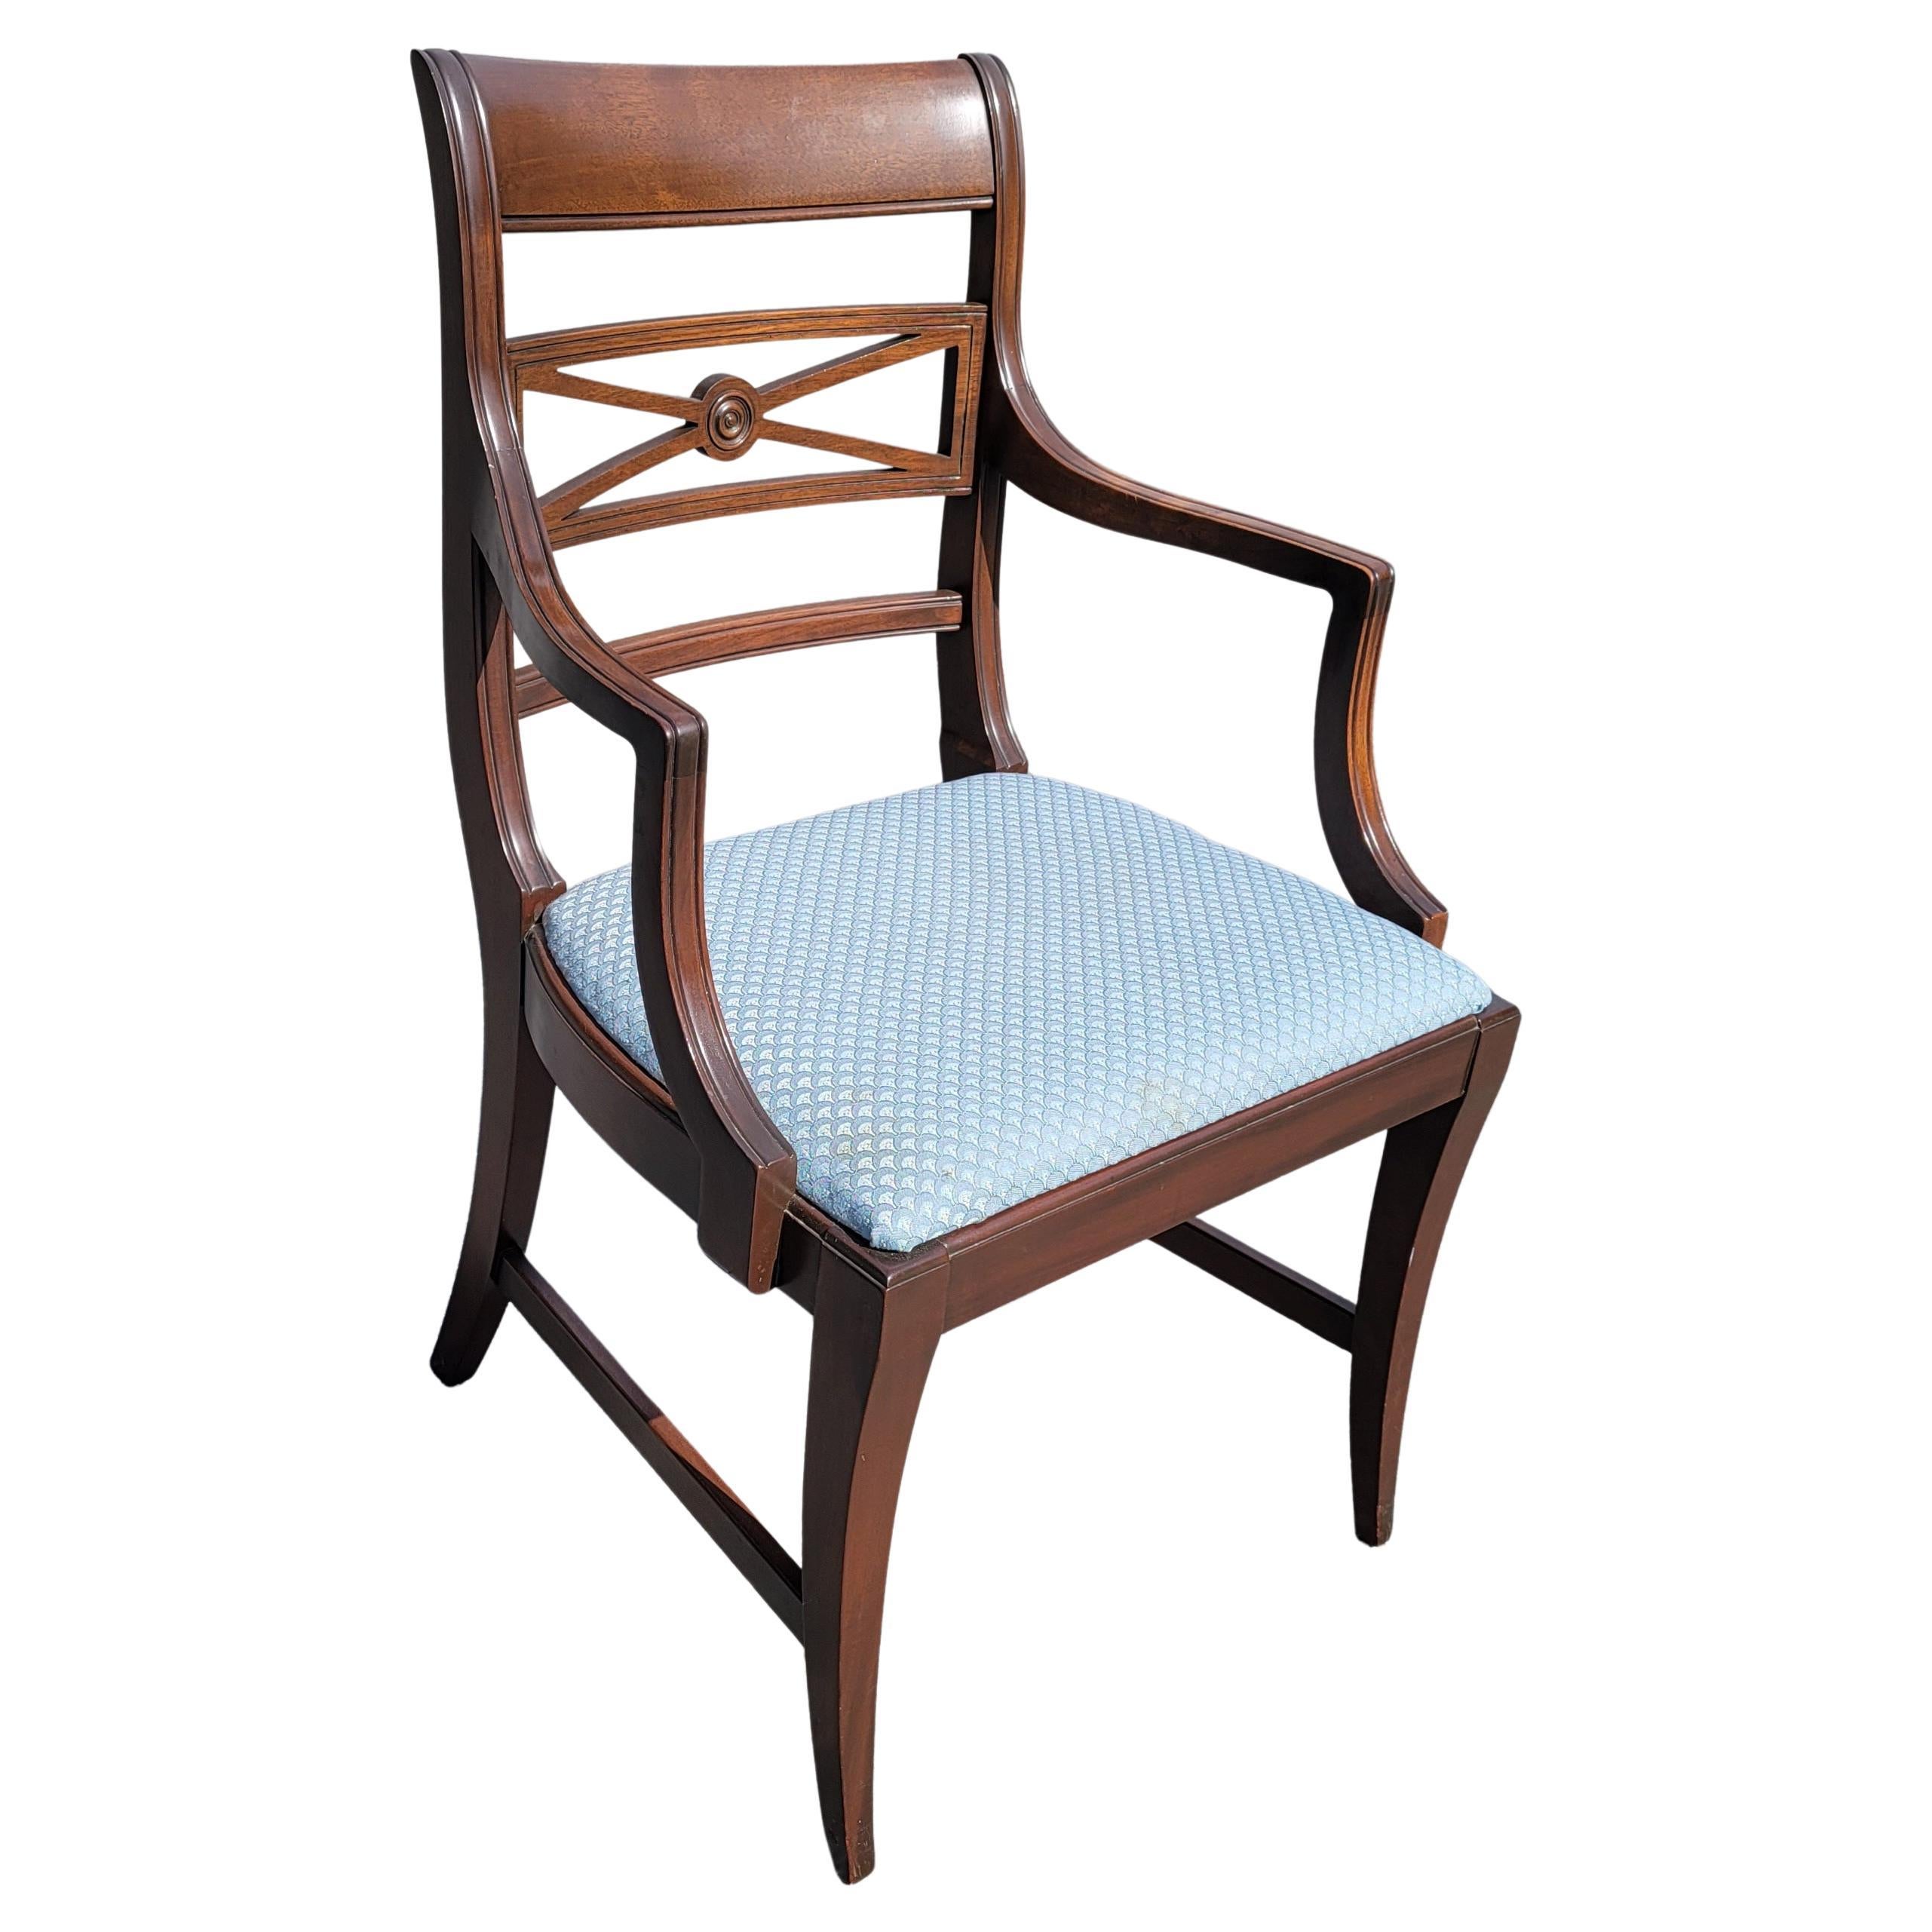 For your consideration is this beautiful, refinished pair of early 20th century regency style solid mahogany armchairs by Estay Manufacturing Co. Estay was founded in 1879 and specialize in Organ, Dining room bedroom fine furniture. The company